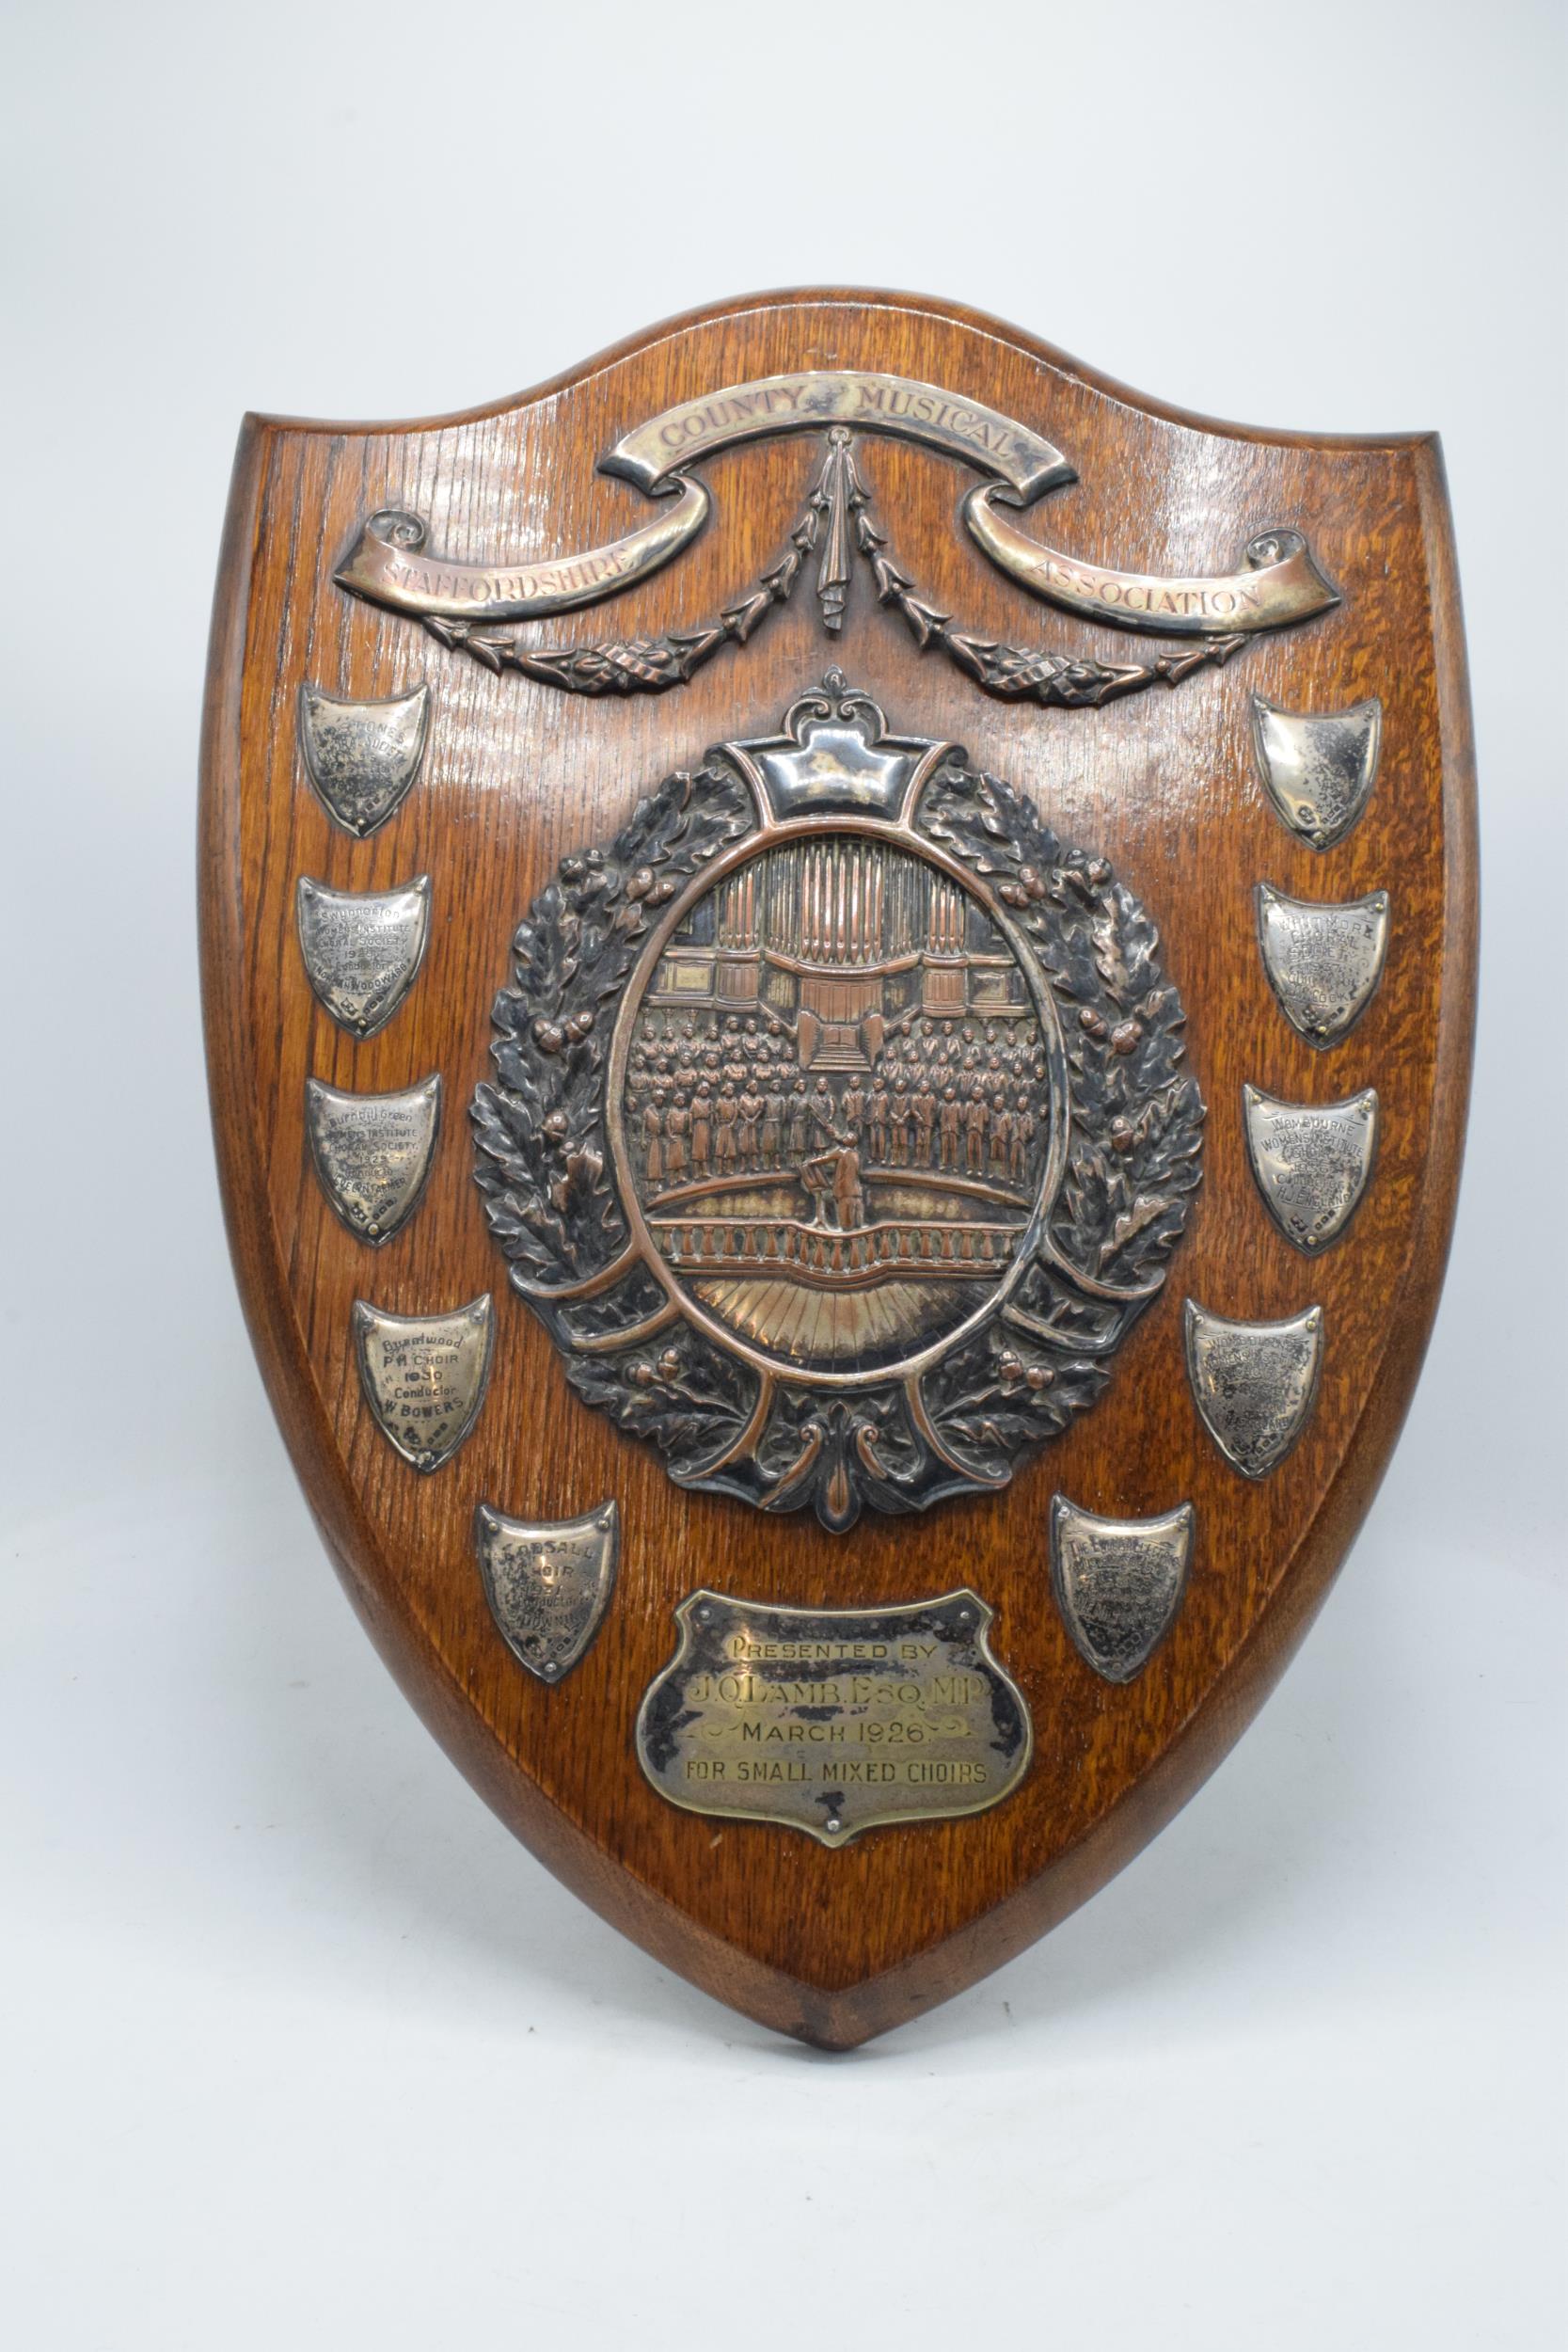 A wooden presentation shield with hallmarked silver name shields and a silver plate central relief